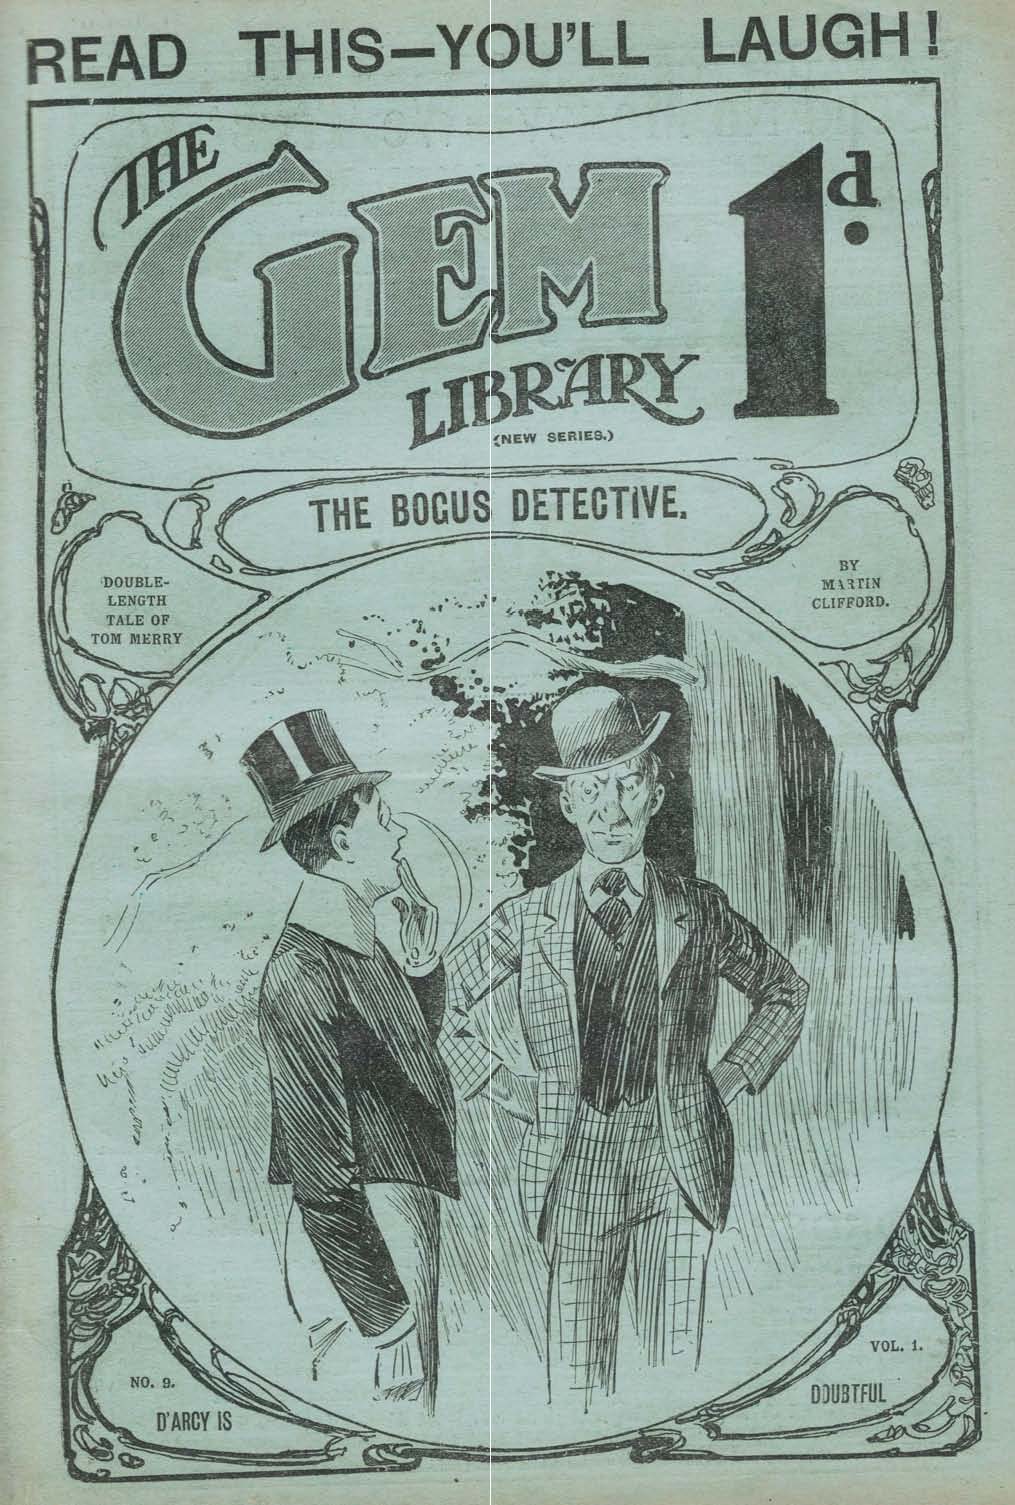 Comic Book Cover For The Gem v2 9 - The Bogus Detective